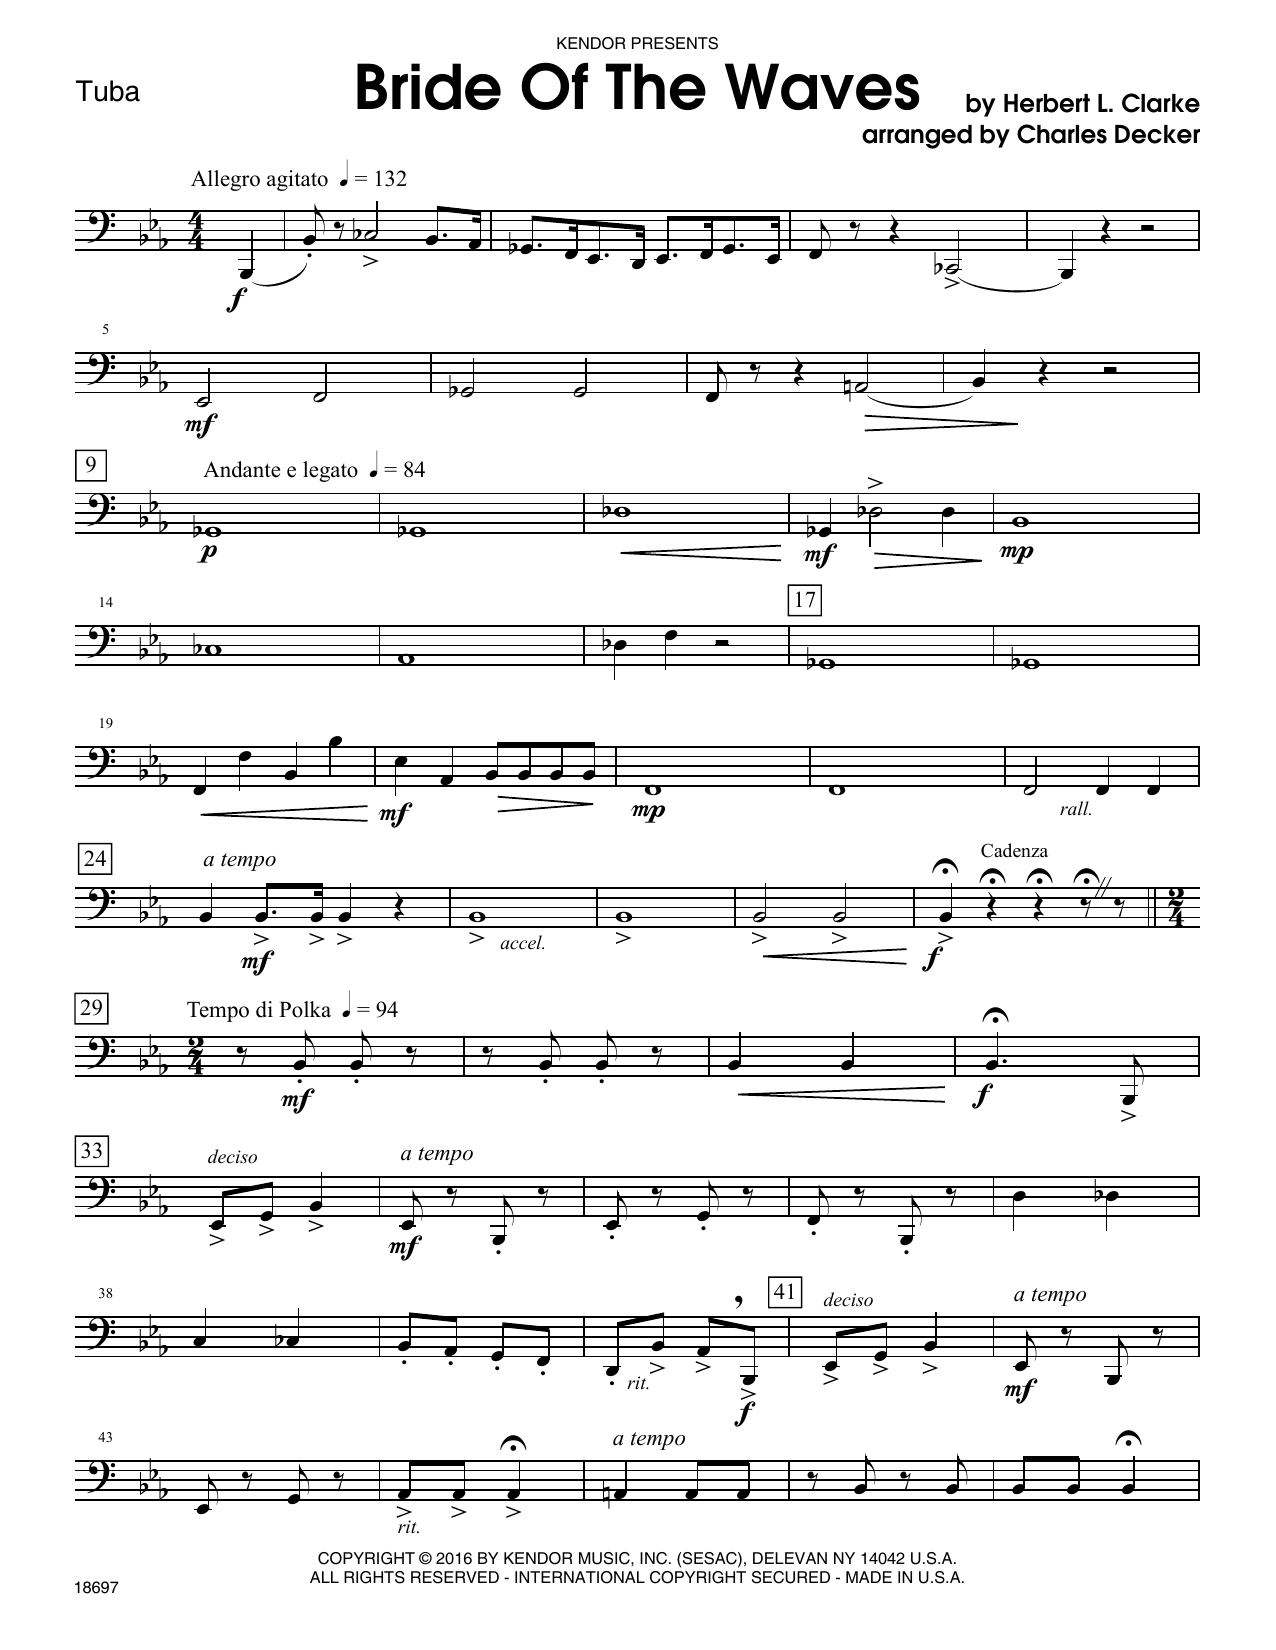 Decker Bride Of The Waves - Tuba sheet music notes and chords. Download Printable PDF.